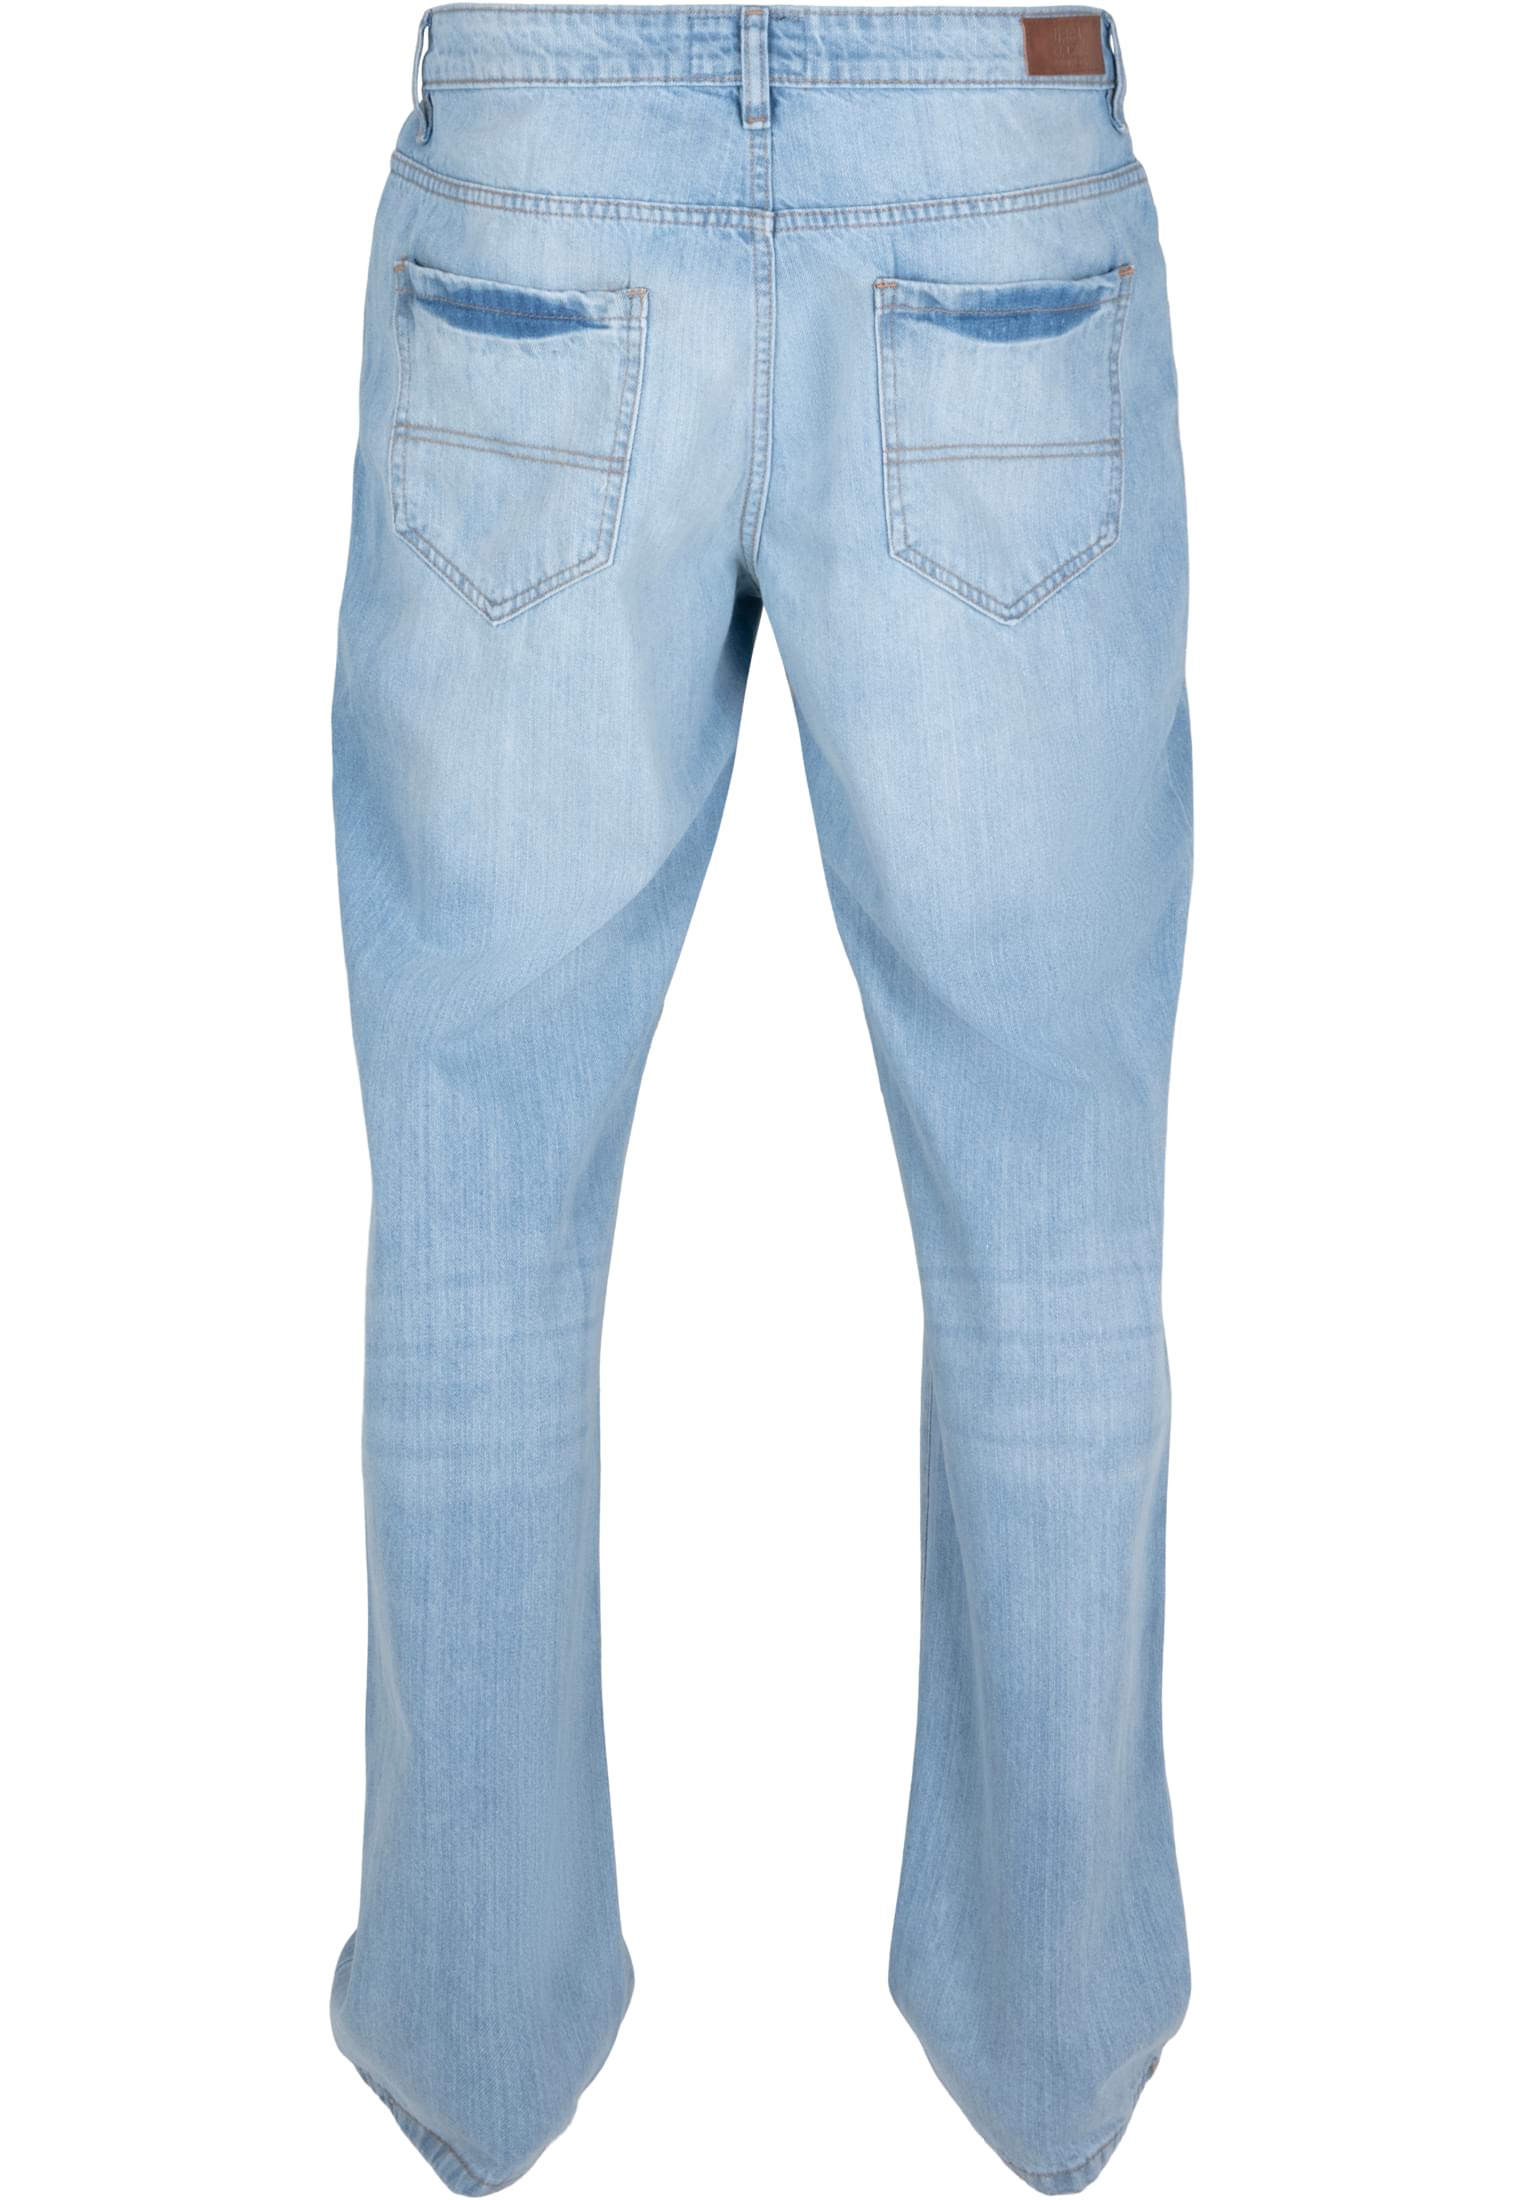 Hosen Loose Fit Jeans in Farbe lighter washed